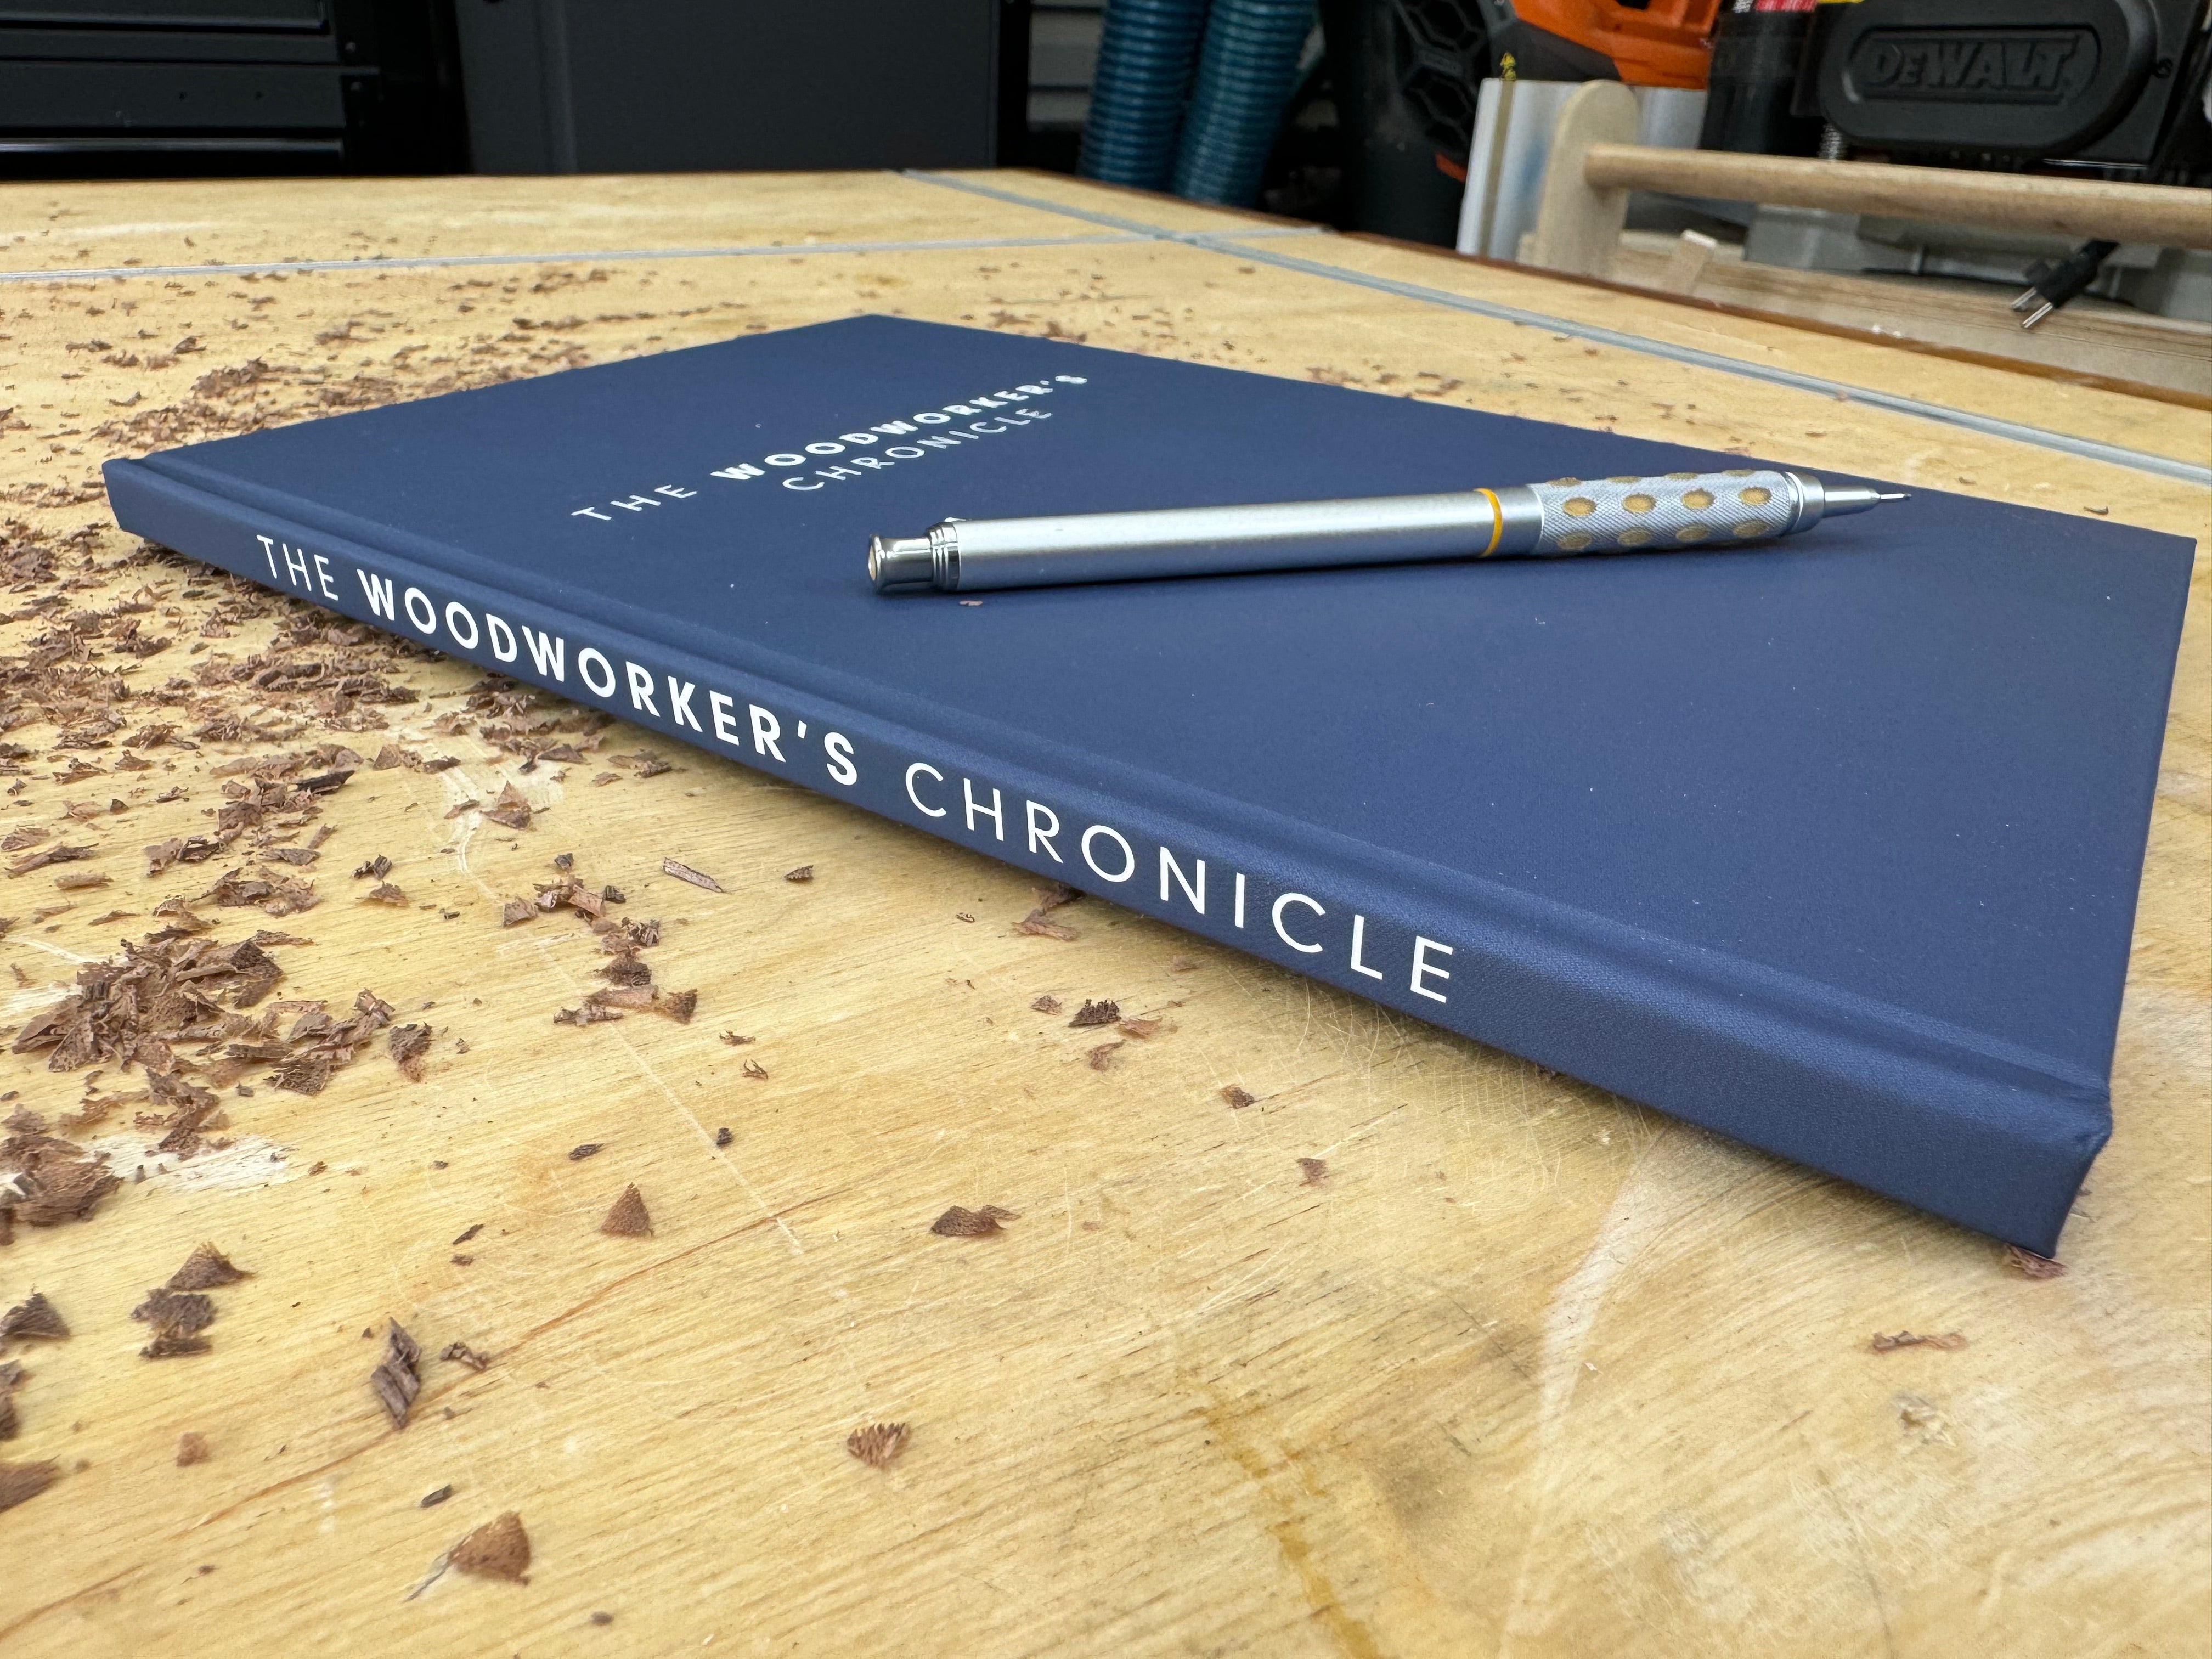 The Woodworker’s Chronicle